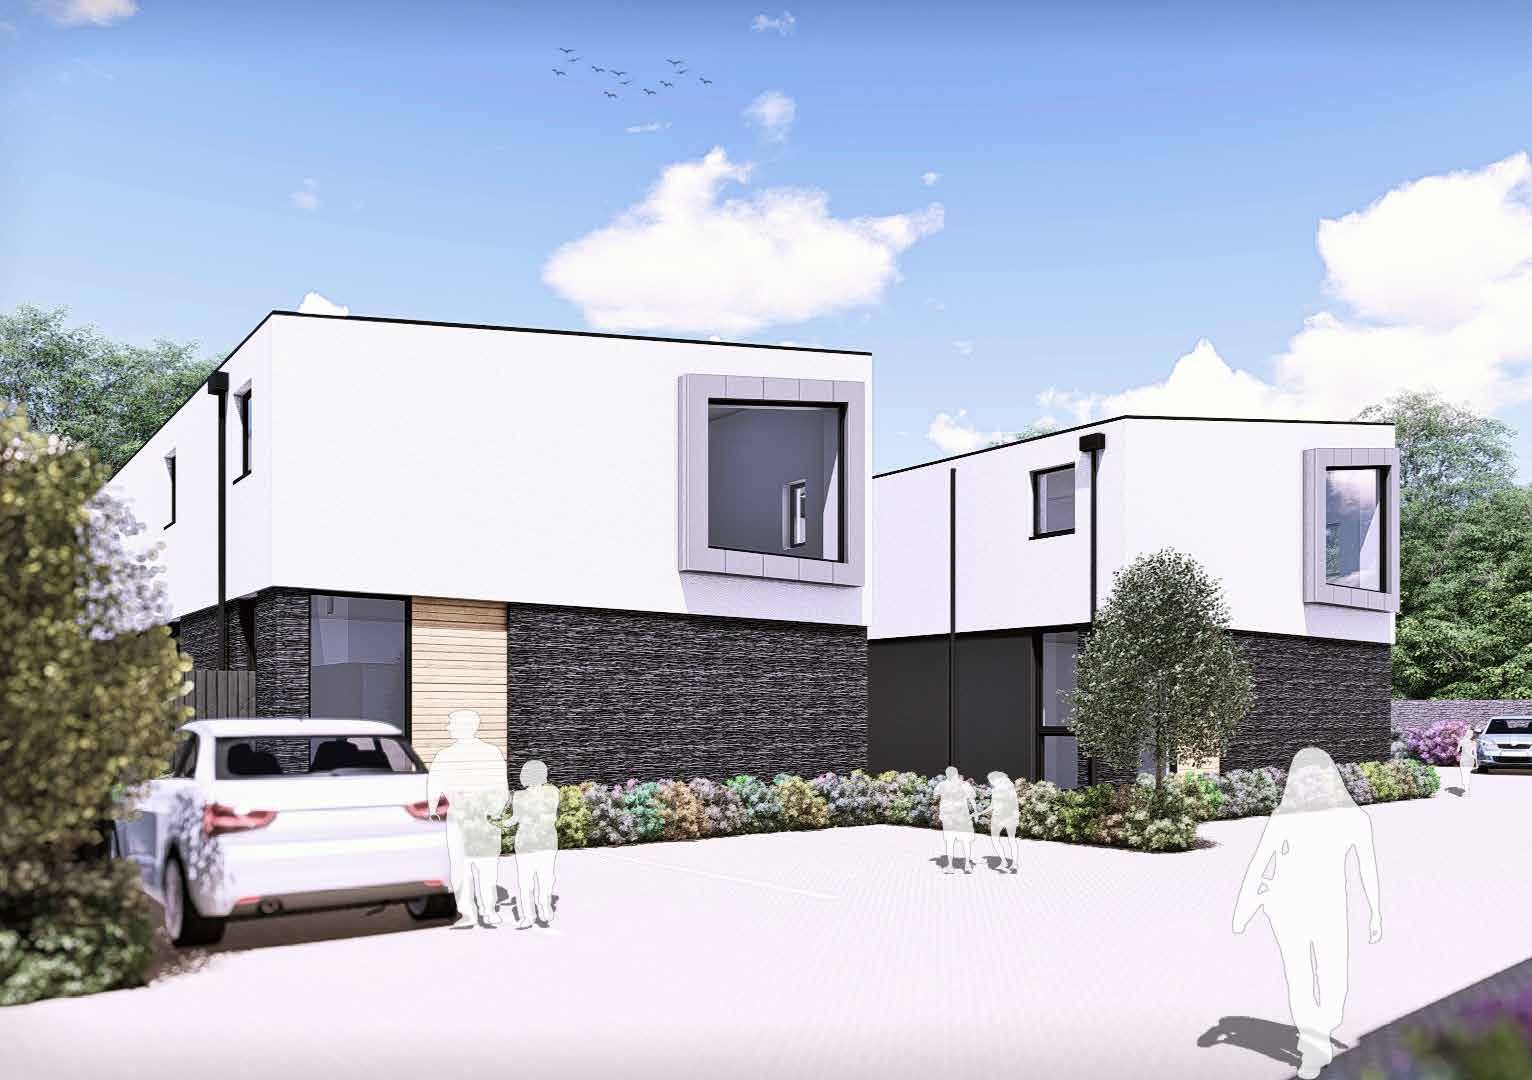 Struan Homes brings low carbon luxury to Crieff